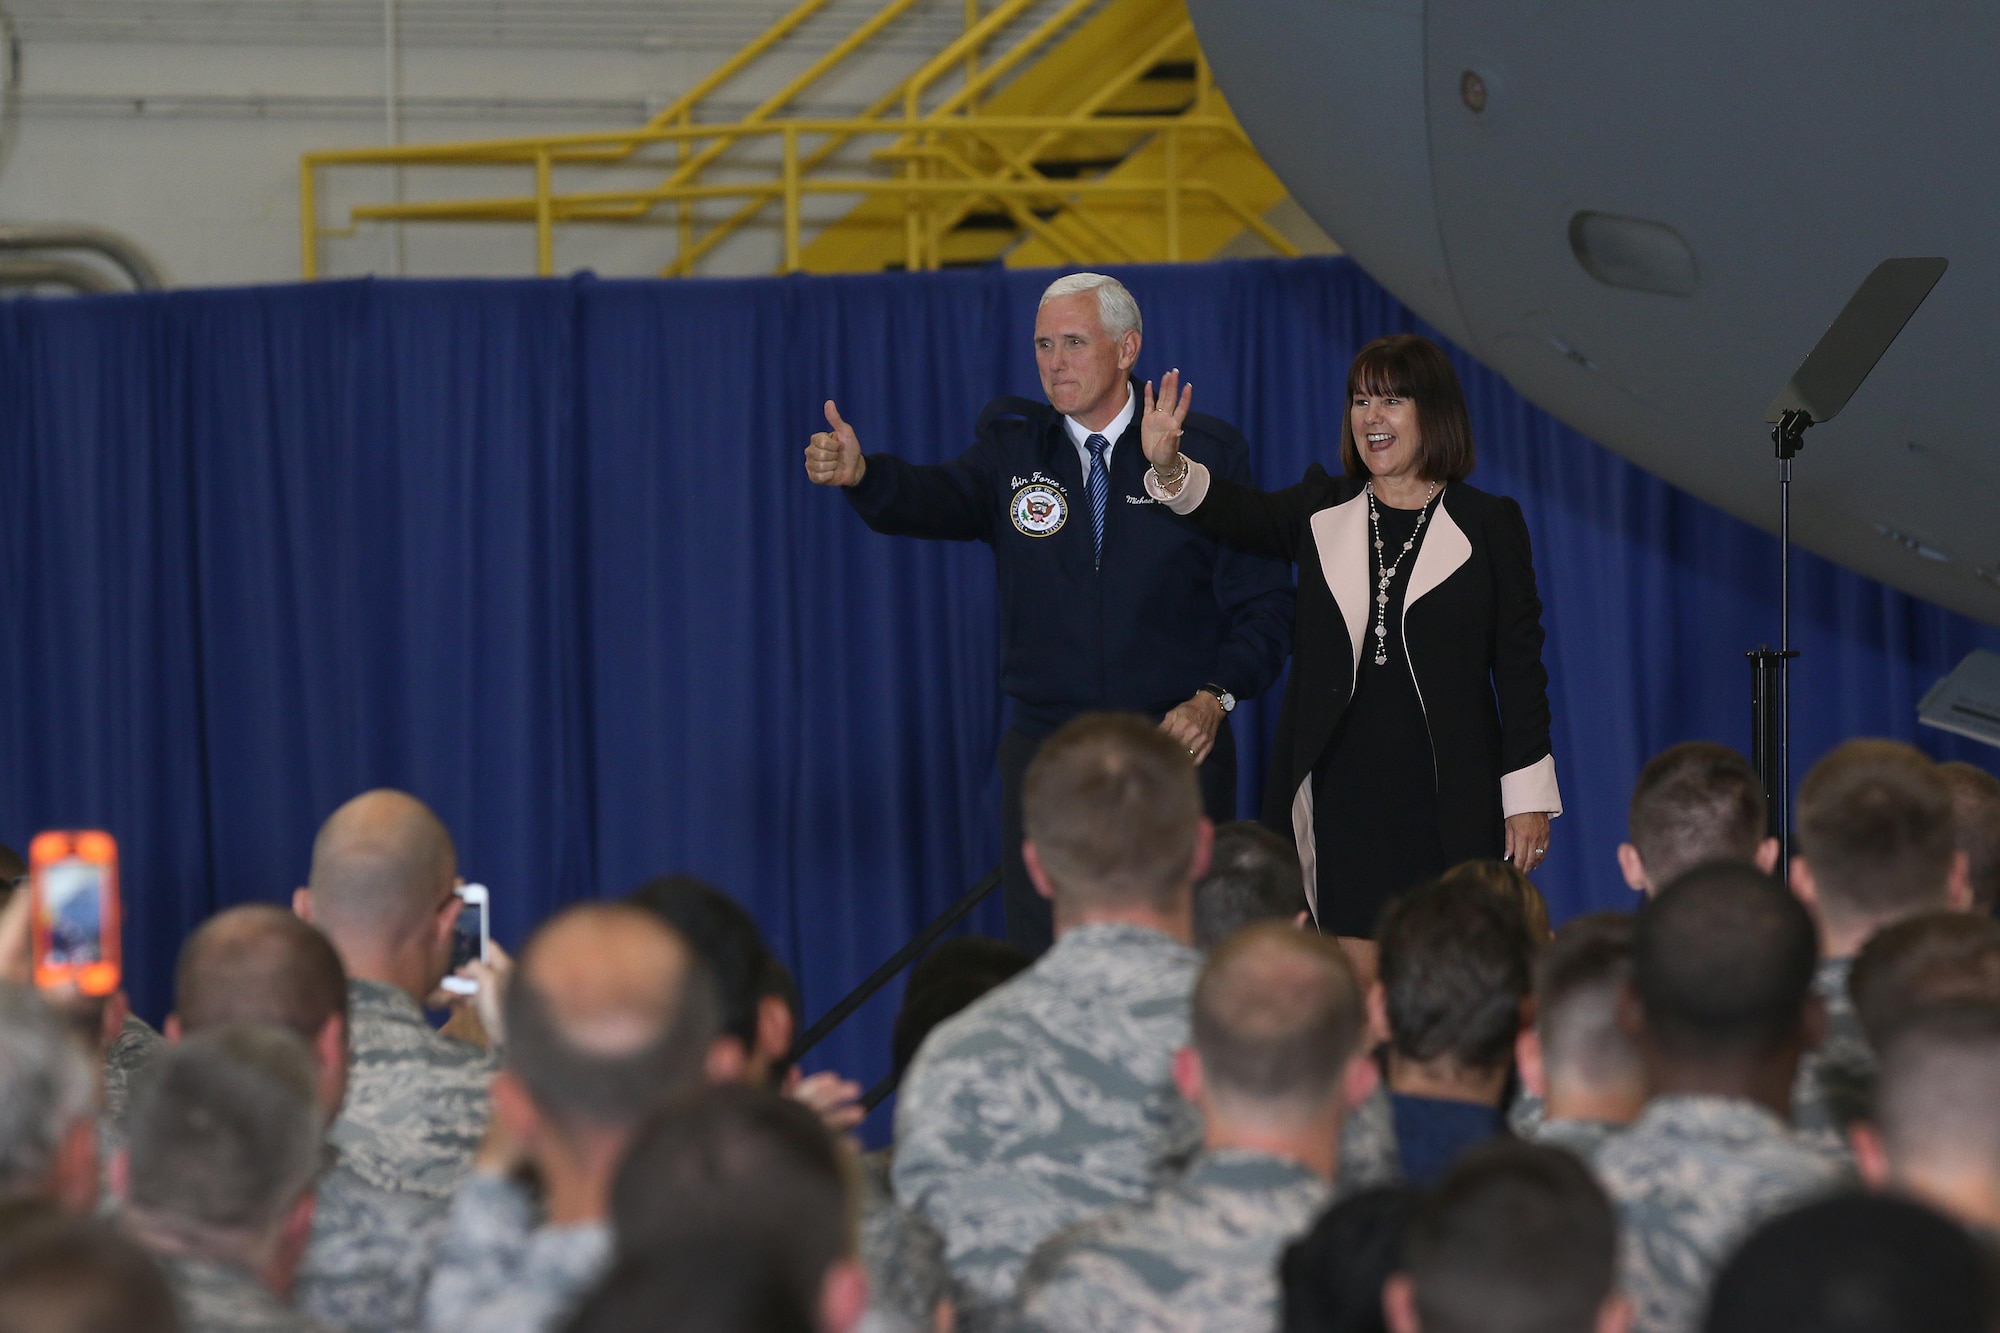 Vice President Mike Pence and his wife Karen wave to military members inside a 445th Airlift Wing hangar as they arrive to greet Airmen and their families, May 20, 2017 . The vice president visited Wright-Patterson Air Force Base to speak to approximately 250 Airmen and families to commemorate Armed Forces Day. (U.S. Air Force photo/Tech. Sgt. Patrick O'Reilly)